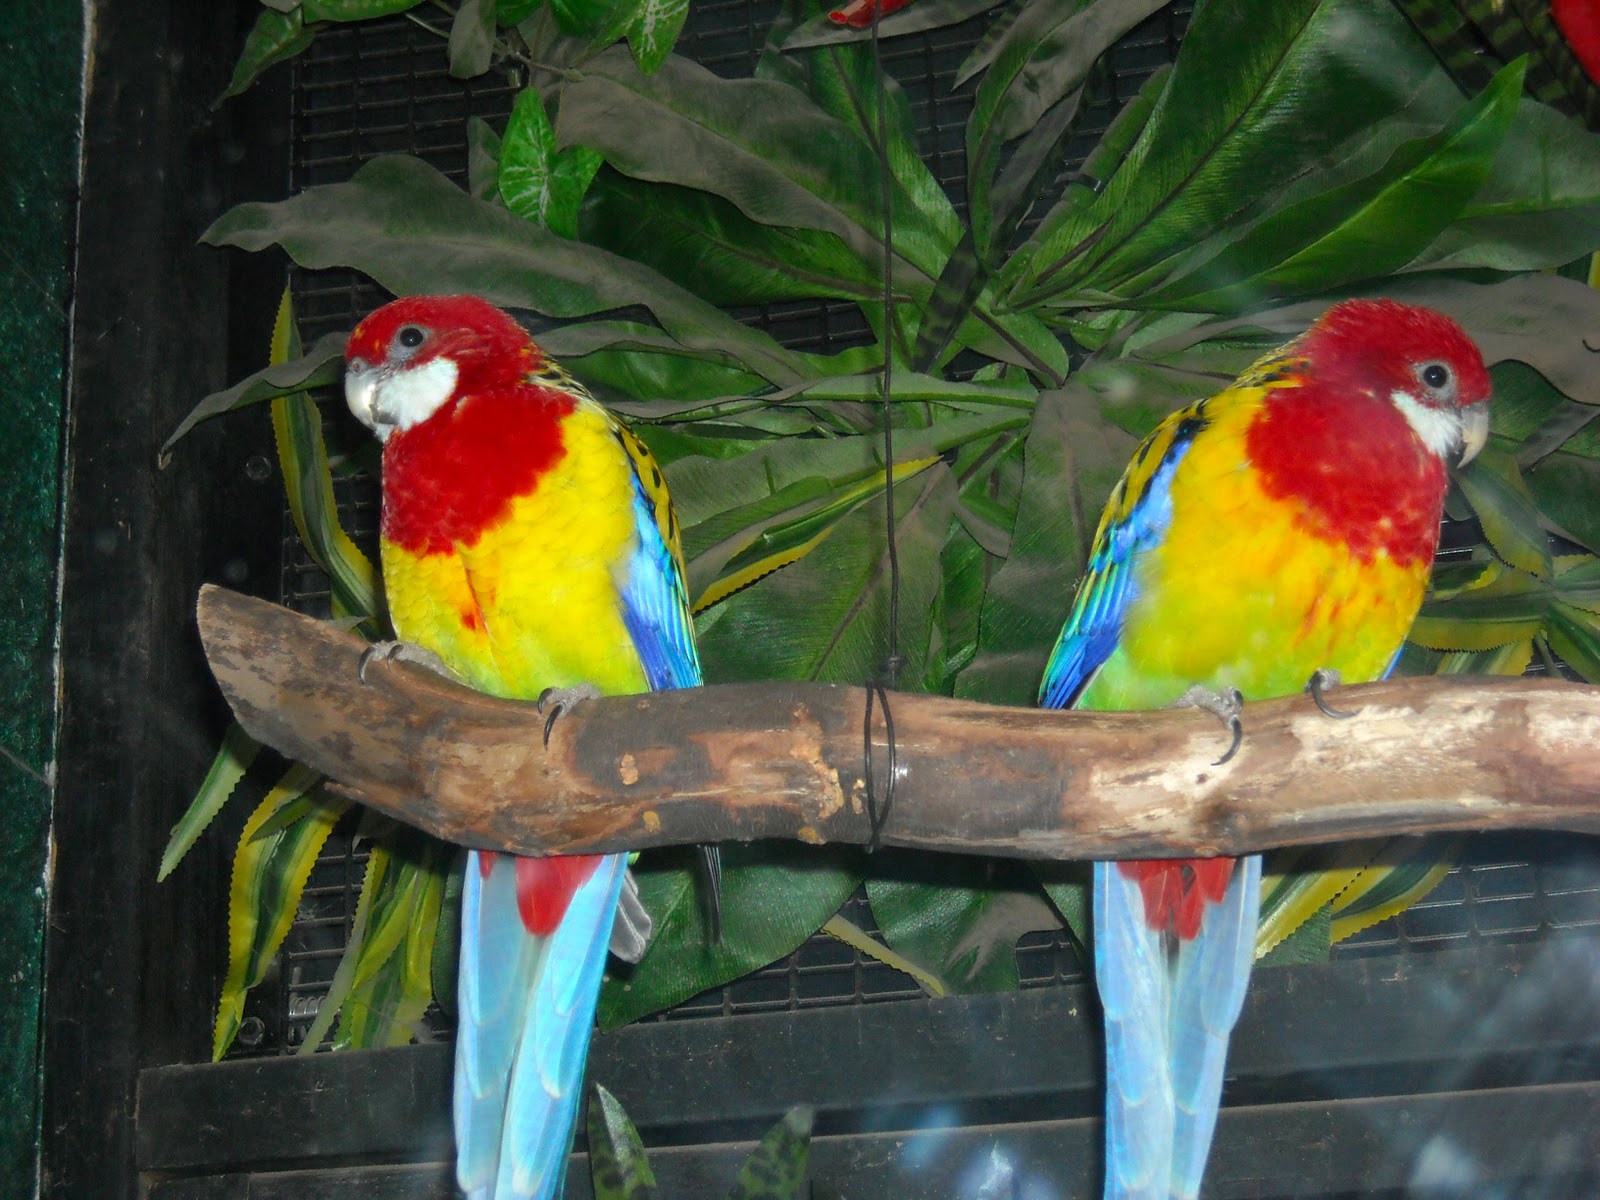 Image Gallary 1: Rainforest Birds Beautiful Pictures